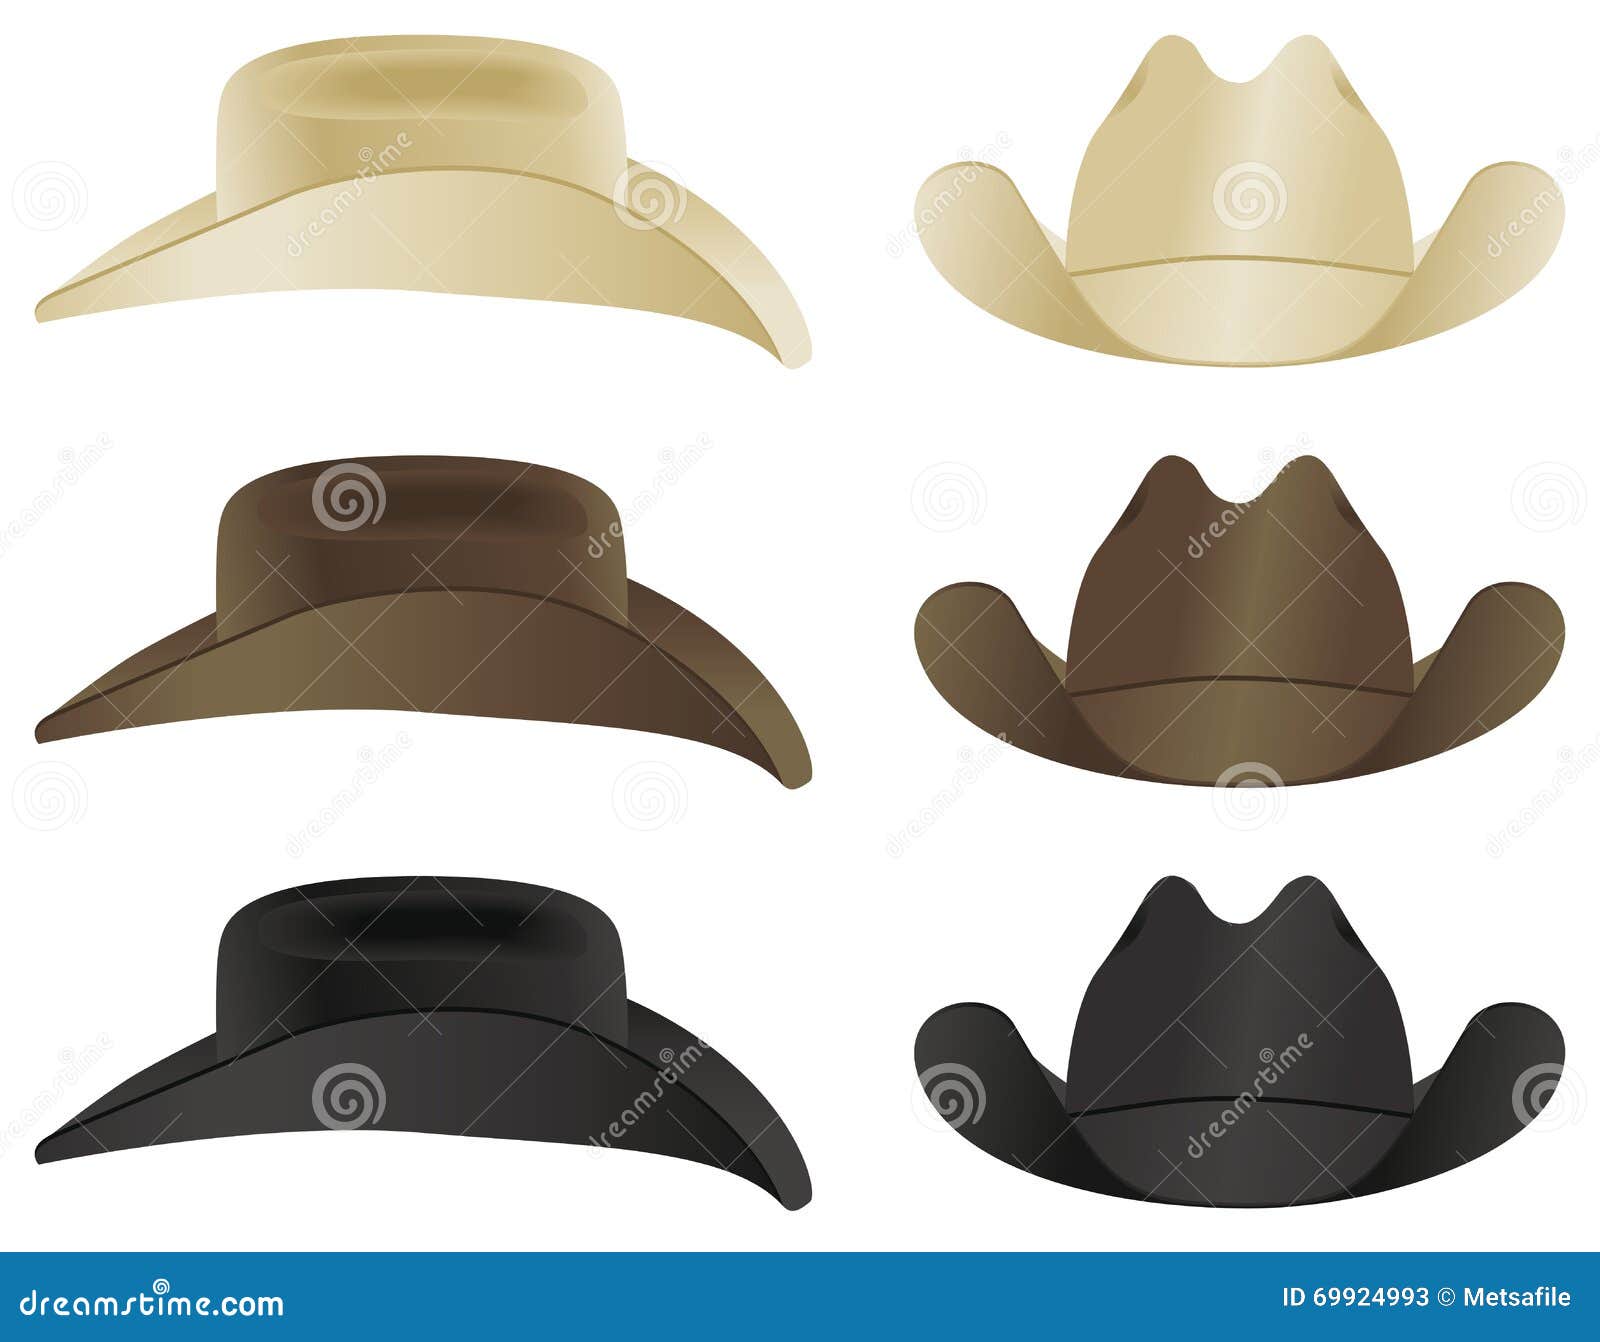 https://thumbs.dreamstime.com/z/cowboy-hat-country-western-selection-69924993.jpg